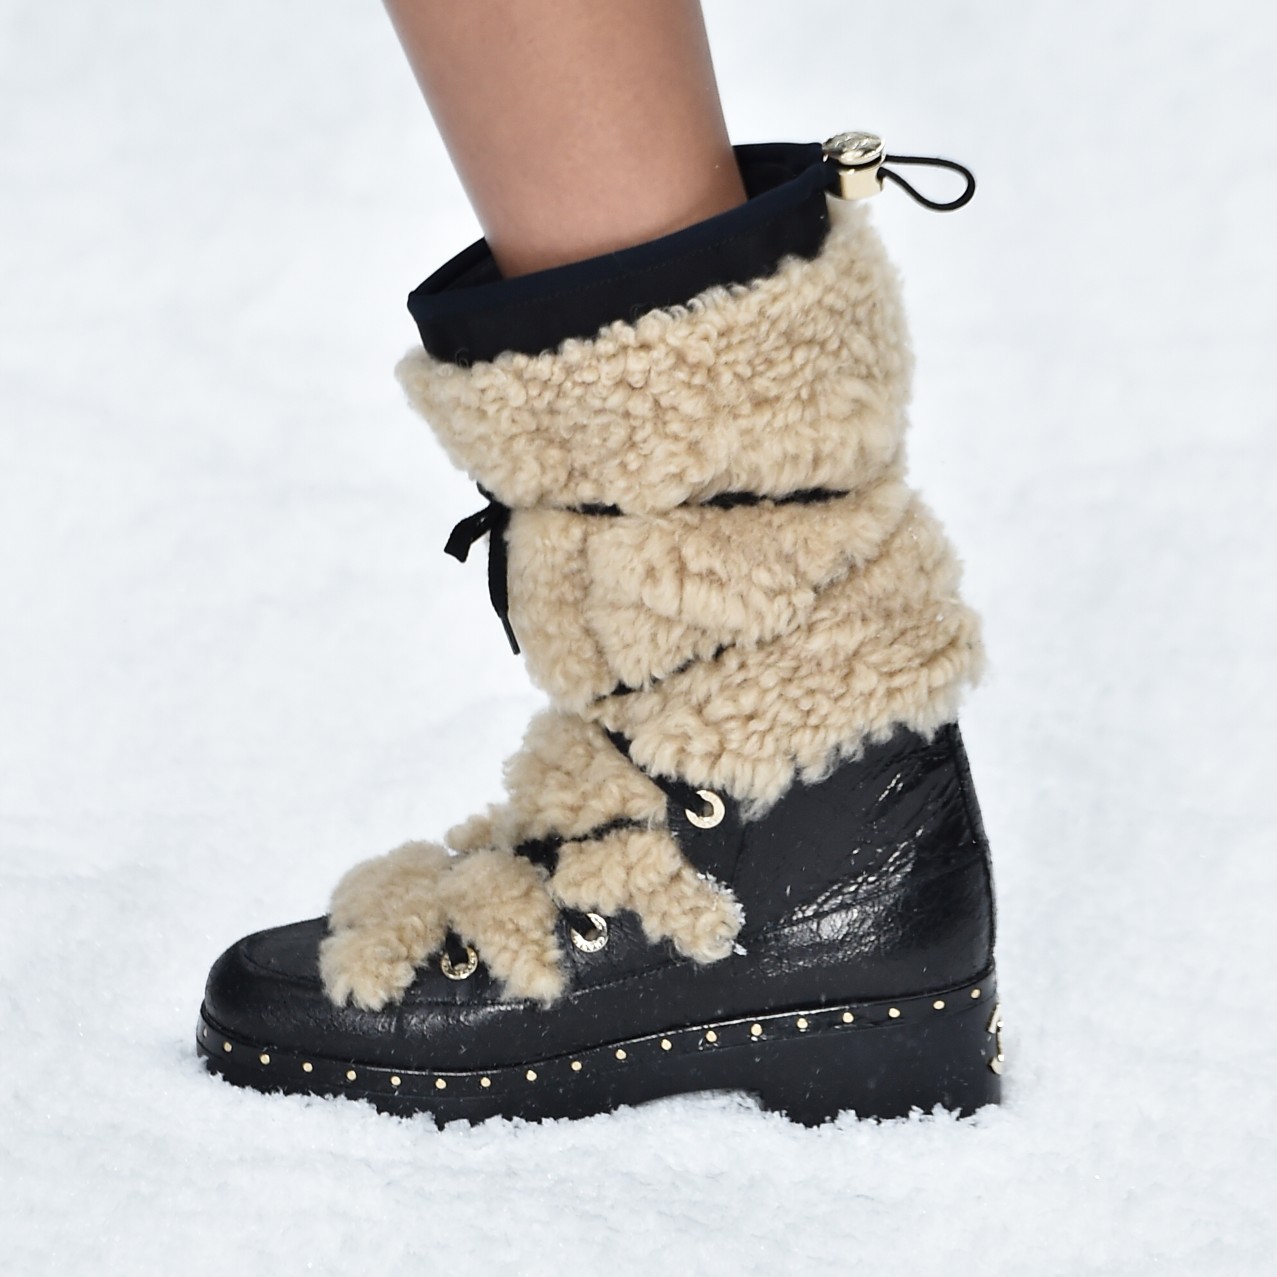 16 Cute Snow Boots for Women in 2023: Stylish Winter Boots